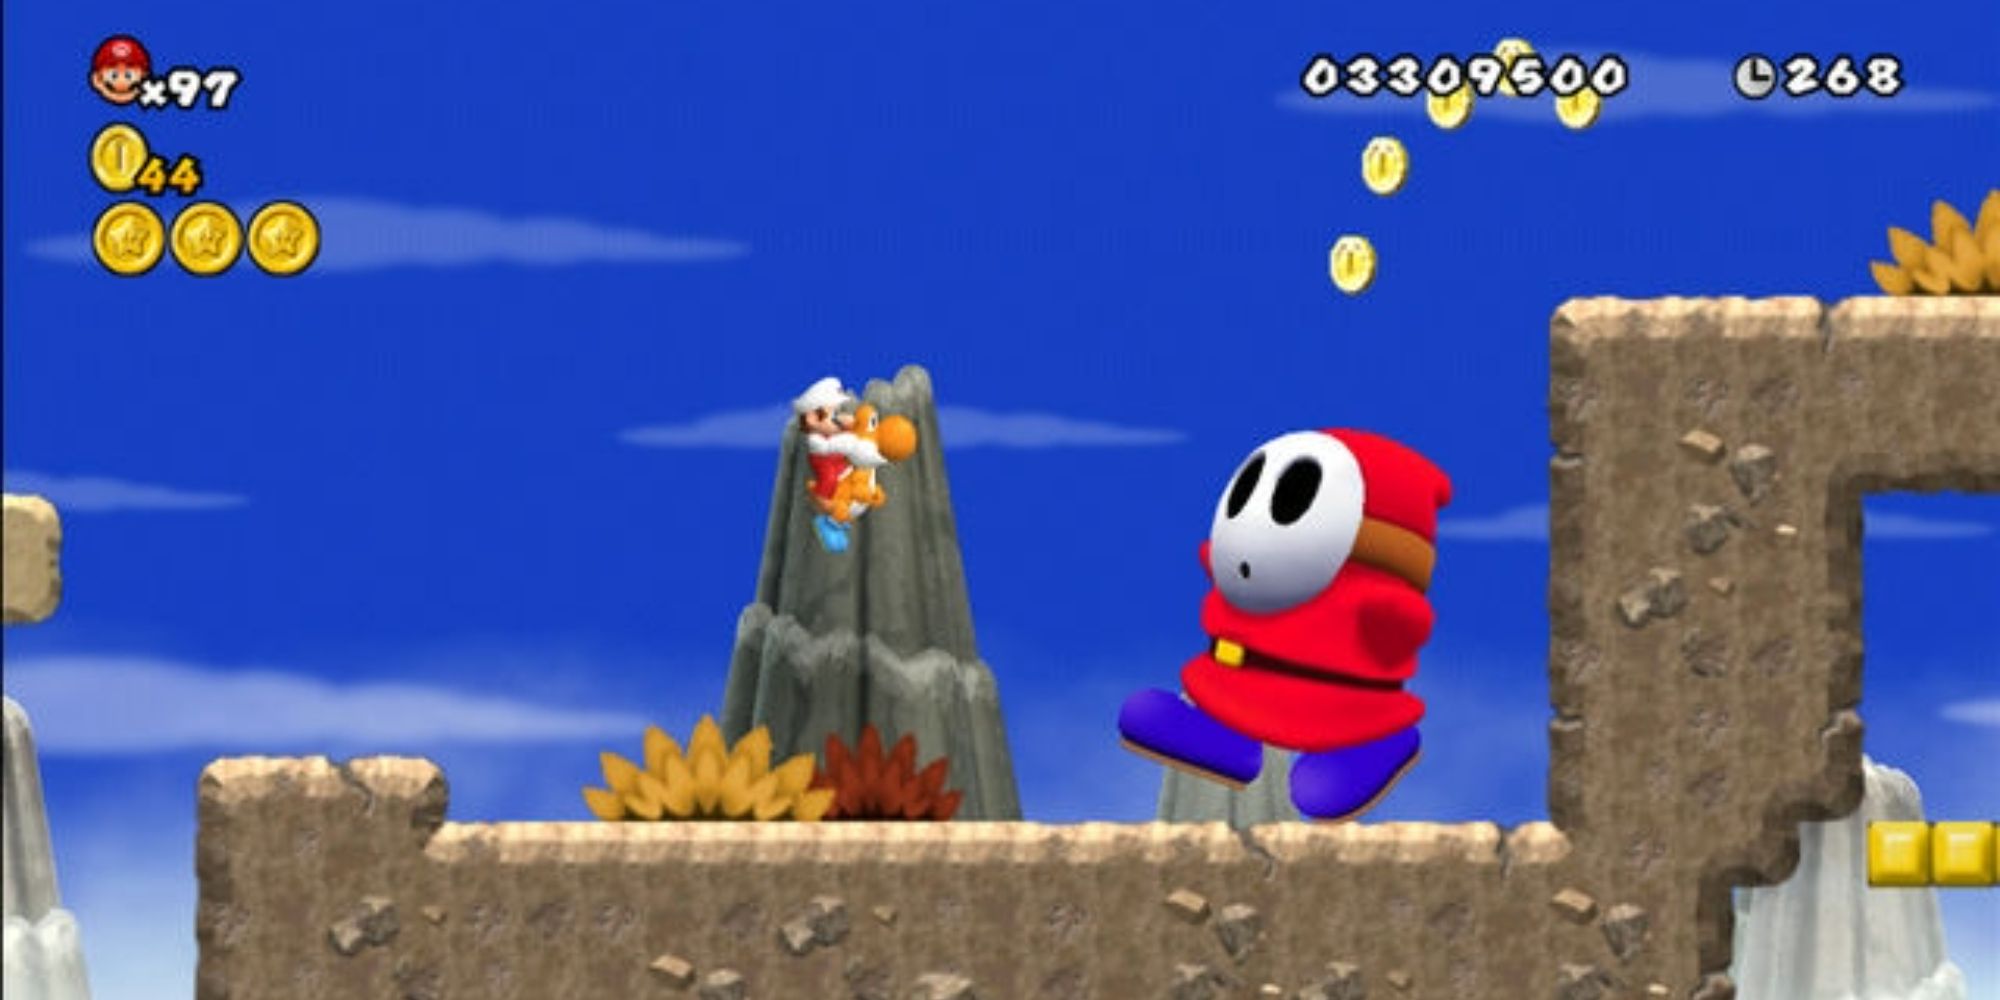 Mario on an orange Yoshi in front of a giant Shy Guy